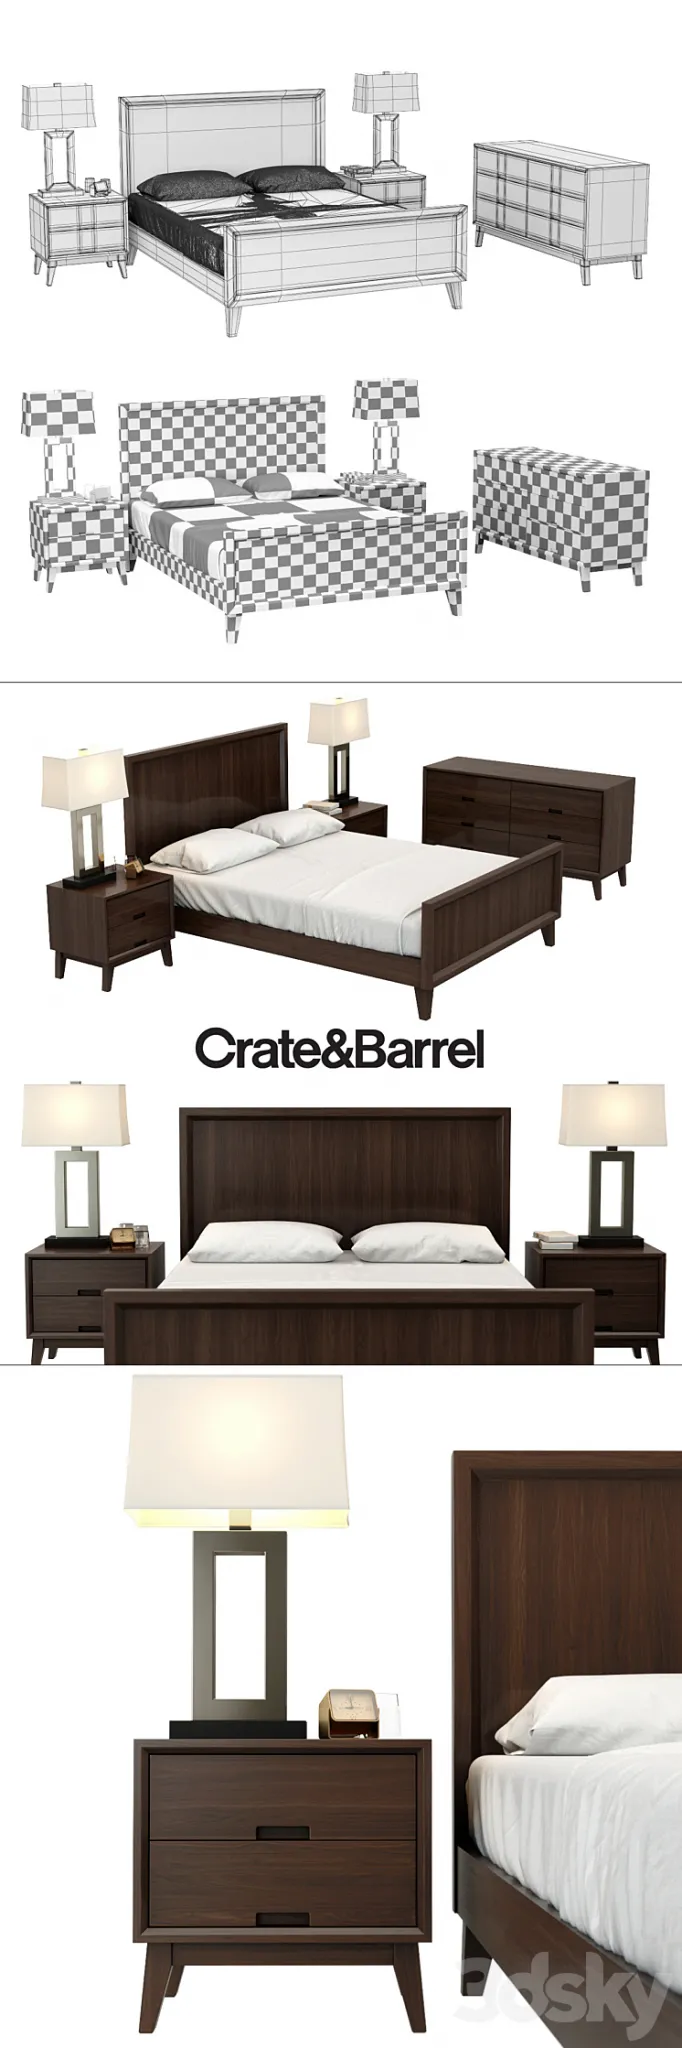 Crate & Barrel \/ STEPPE COLLECTION 3DS Max